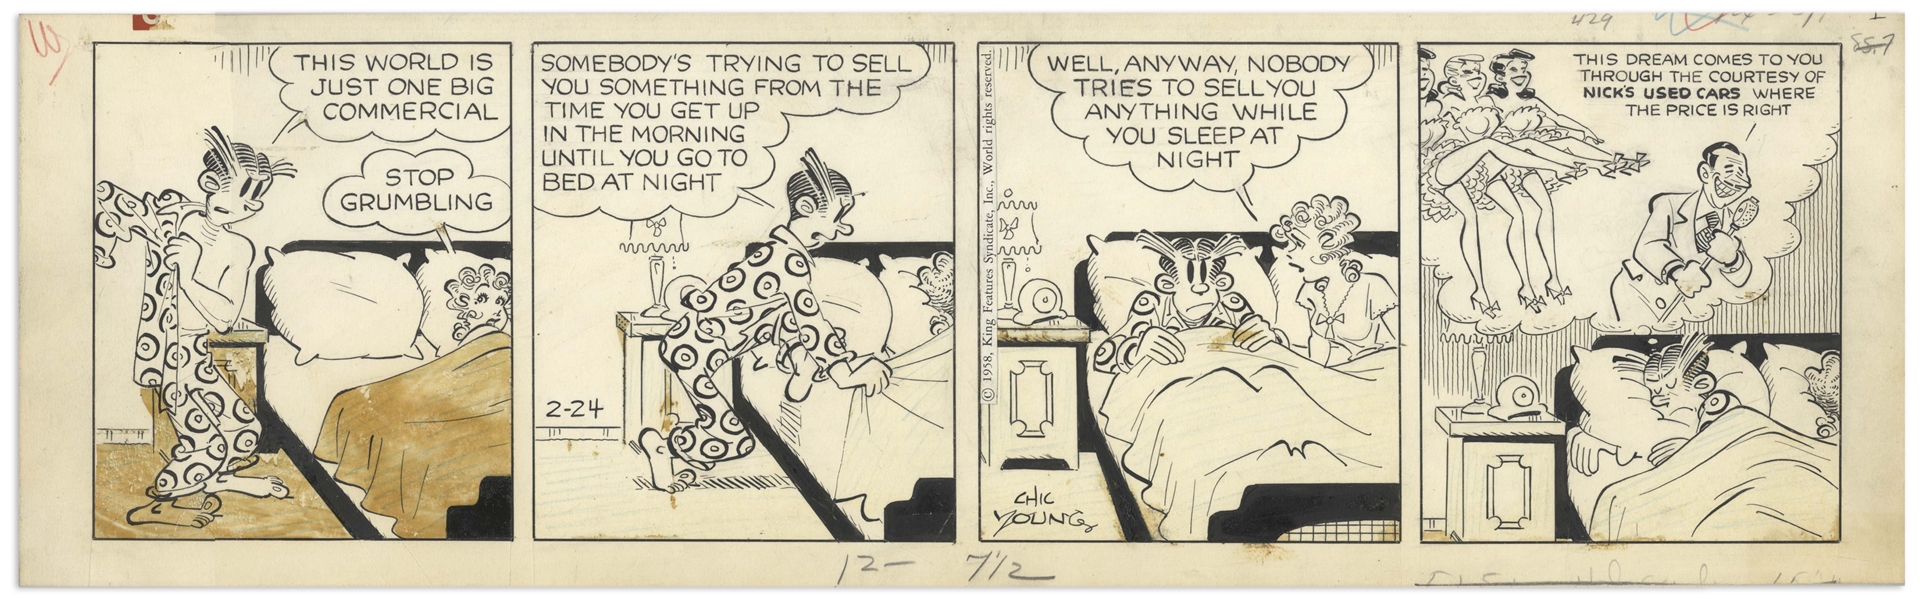 Chic Young Hand-Drawn ''Blondie'' Comic Strip From 1958 Titled ''The Price Is Right'' -- Dagwood Bemoans Commercialism